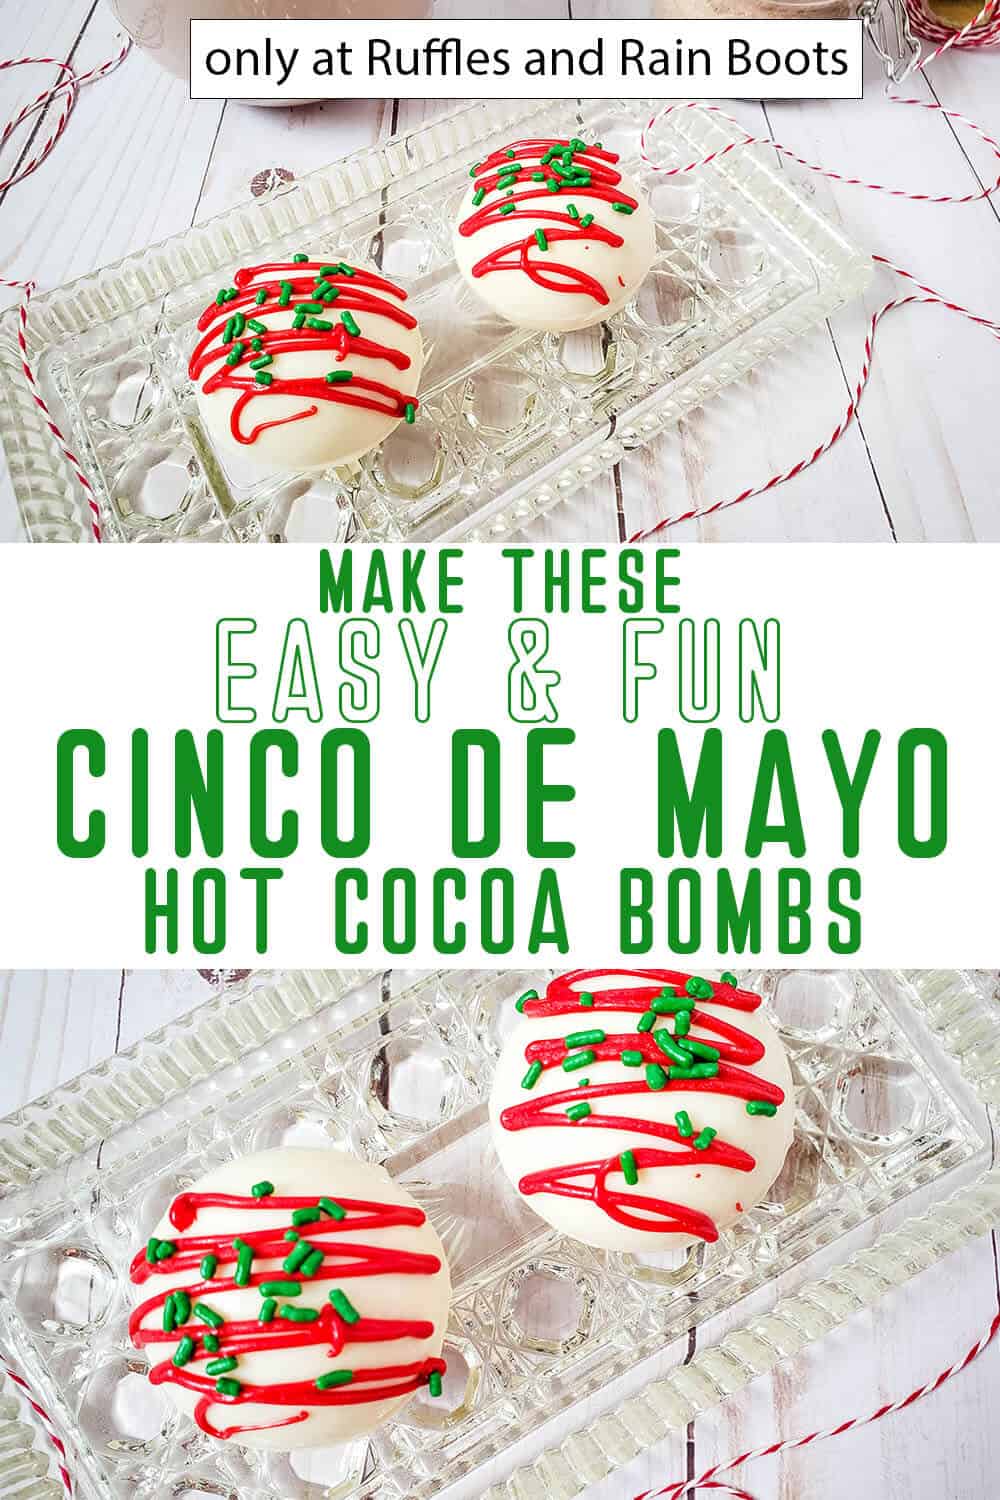 photo collage of cinco de mayo hot chocolate bombs with text which reads make these easy & fun cinco de mayo hot cocoa bombs